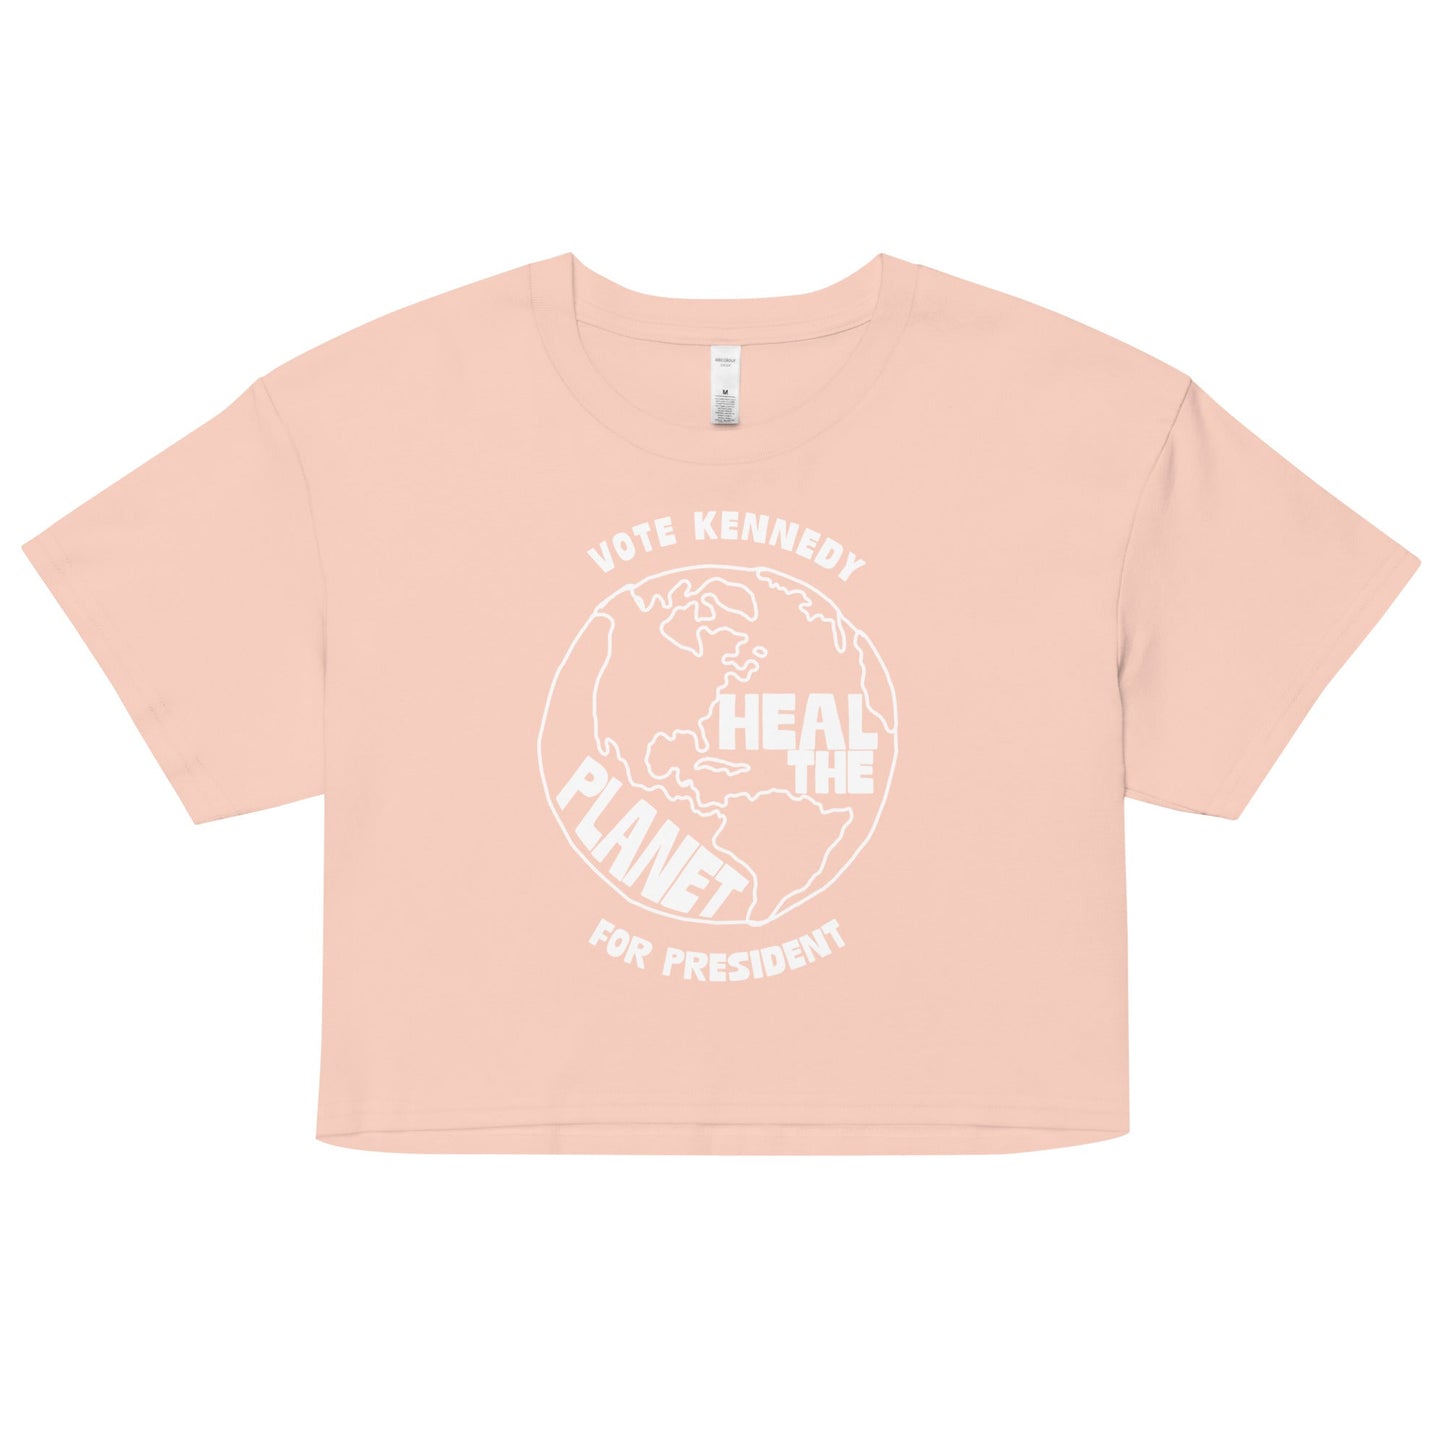 Heal the Planet Crop Top - TEAM KENNEDY. All rights reserved